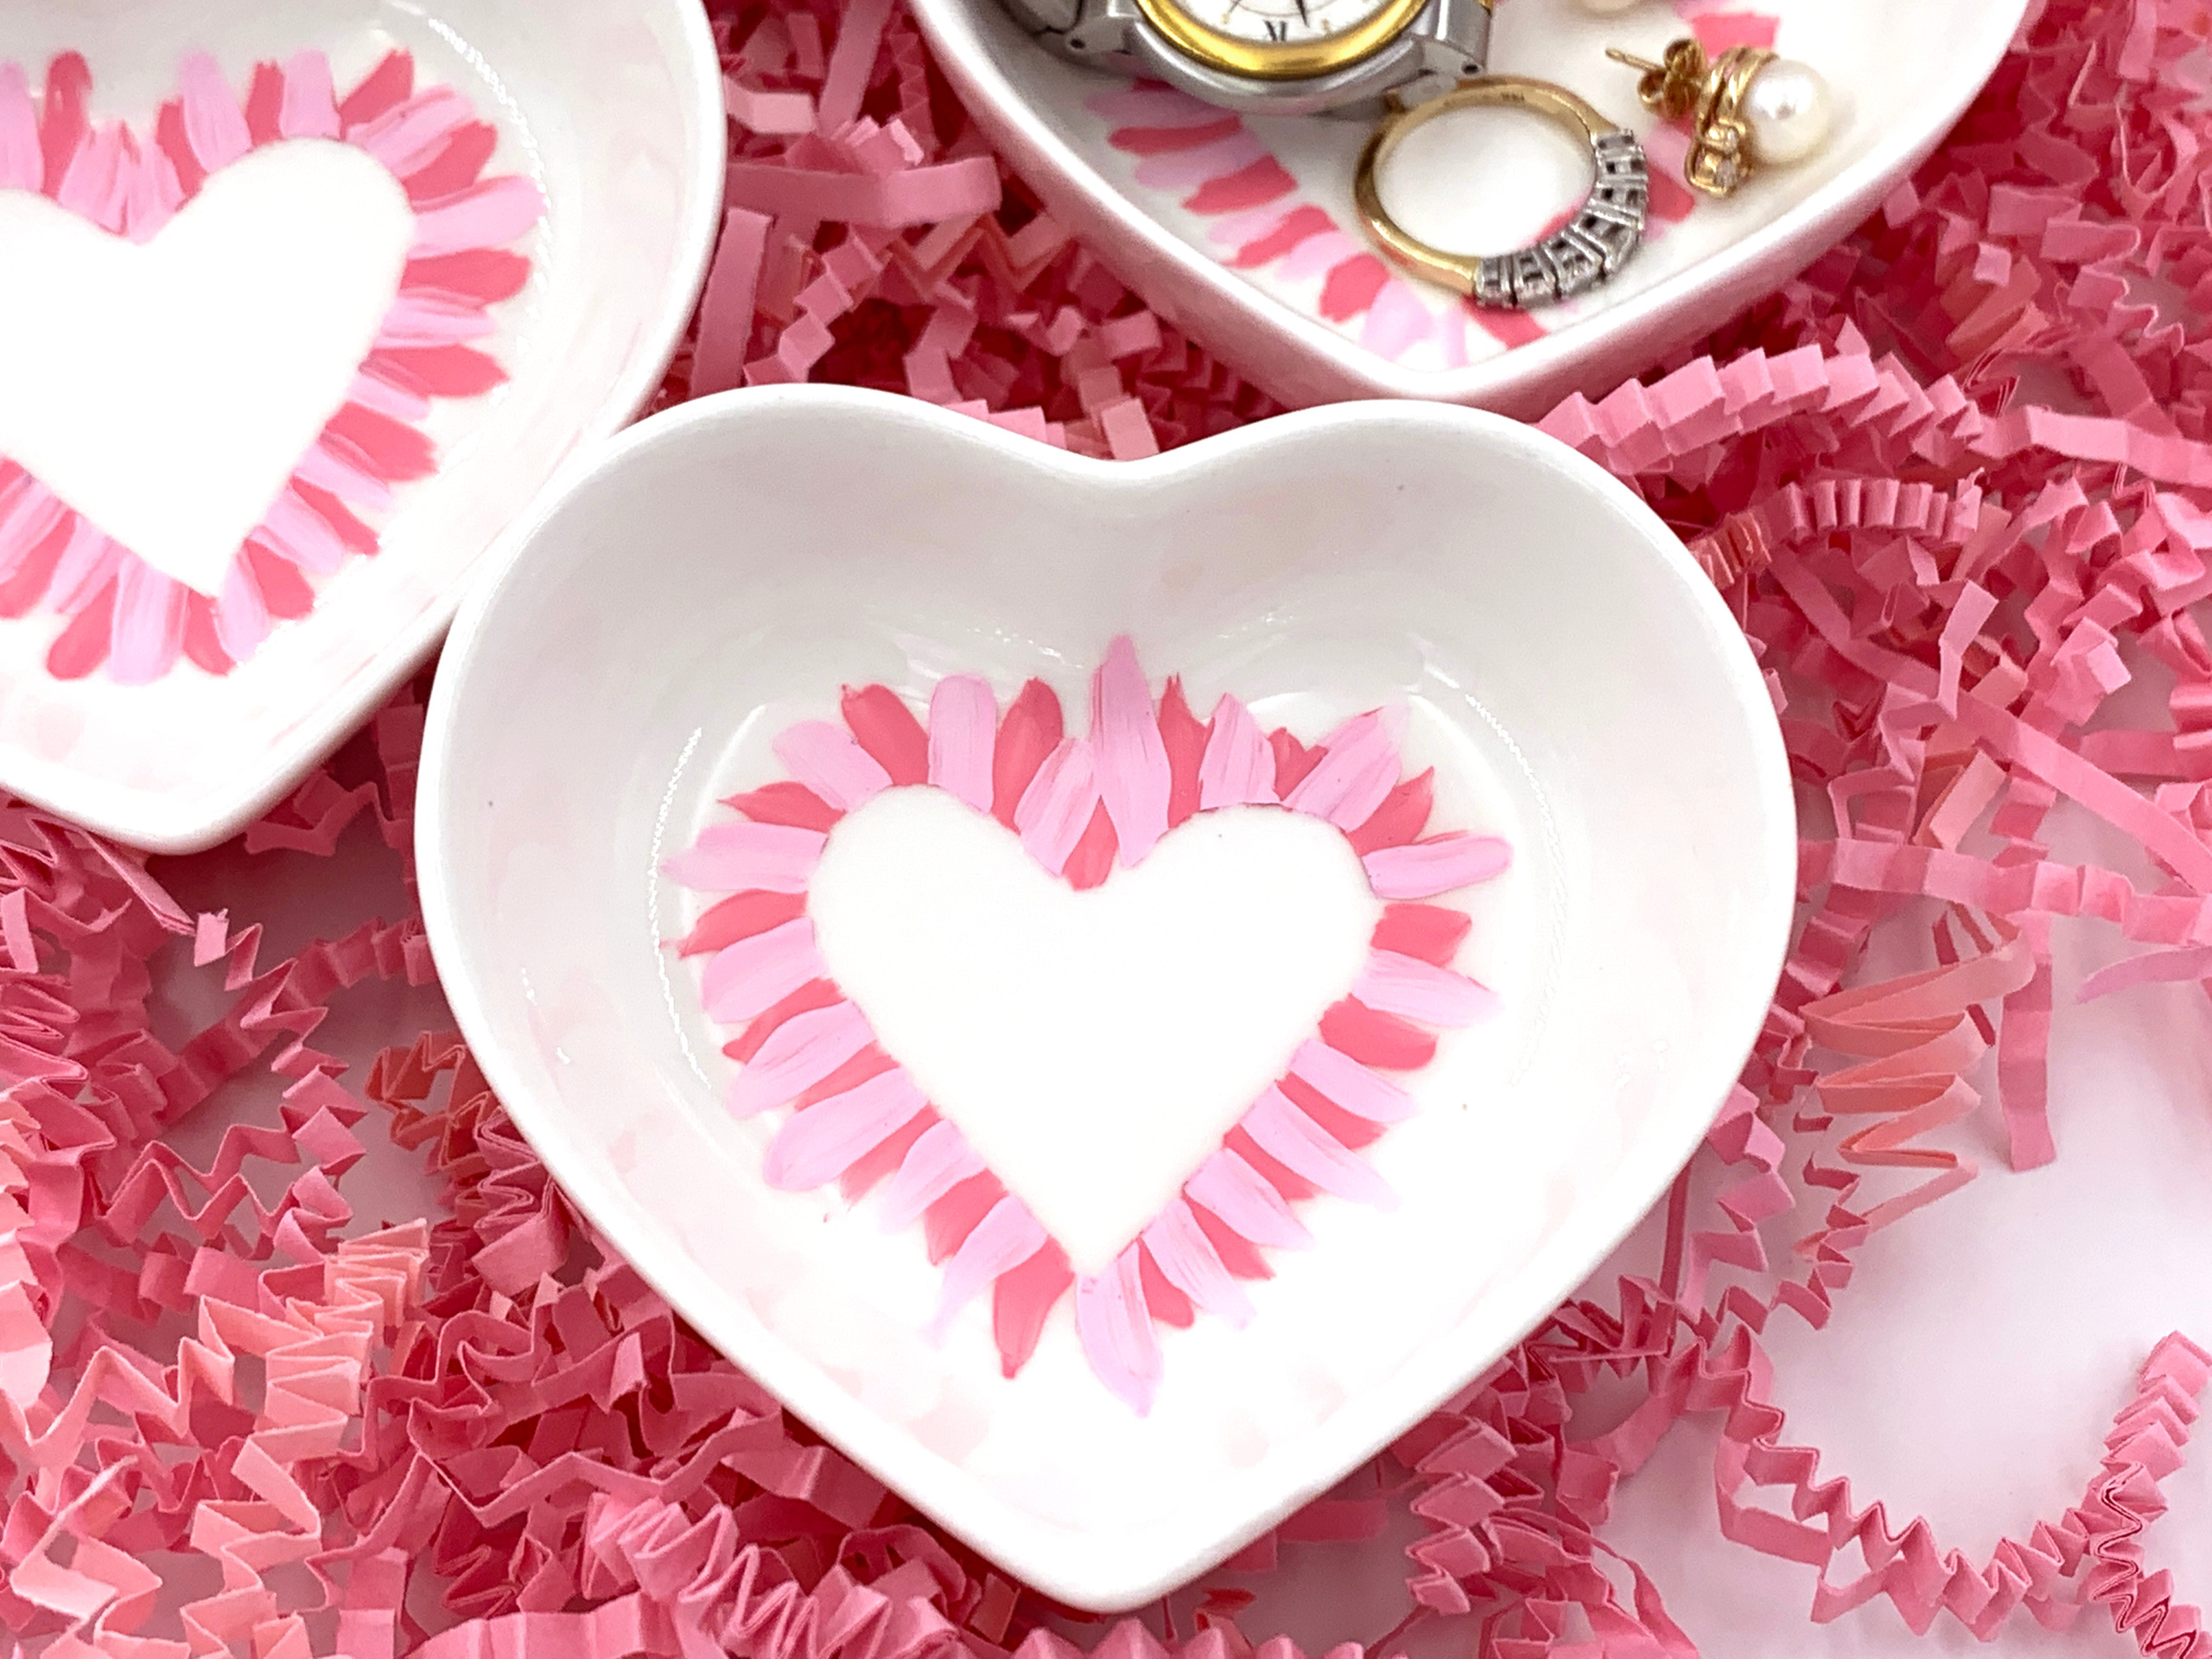 Details about   NEW!~Ganz Ceramic Valentine's Day Kiss Me Frog Trinket/Candy/Jewelry Dish~Hearts 